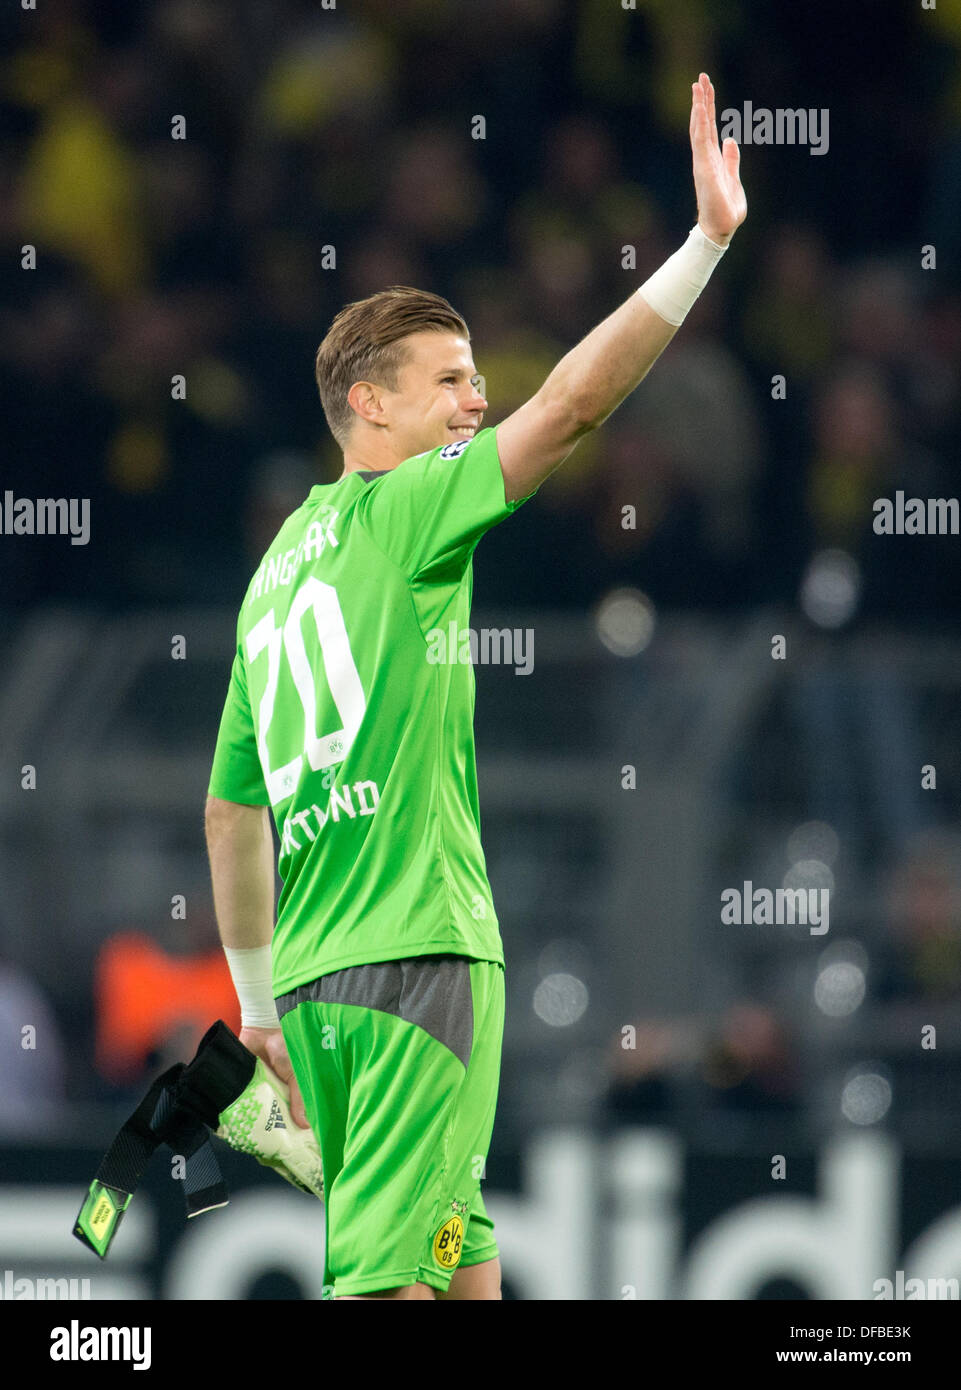 Dortmund, Germany. 01st Oct, 2013. Borussia Dortmund's goalkeeper Mitchell Langerak waves to the fans after the Champions League Group F match between Borussia Dortmund and Olympique Marseille in Dortmund, Germany, 01 October 2013. Photo: Bernd Thissen/dpa/Alamy Live News Stock Photo